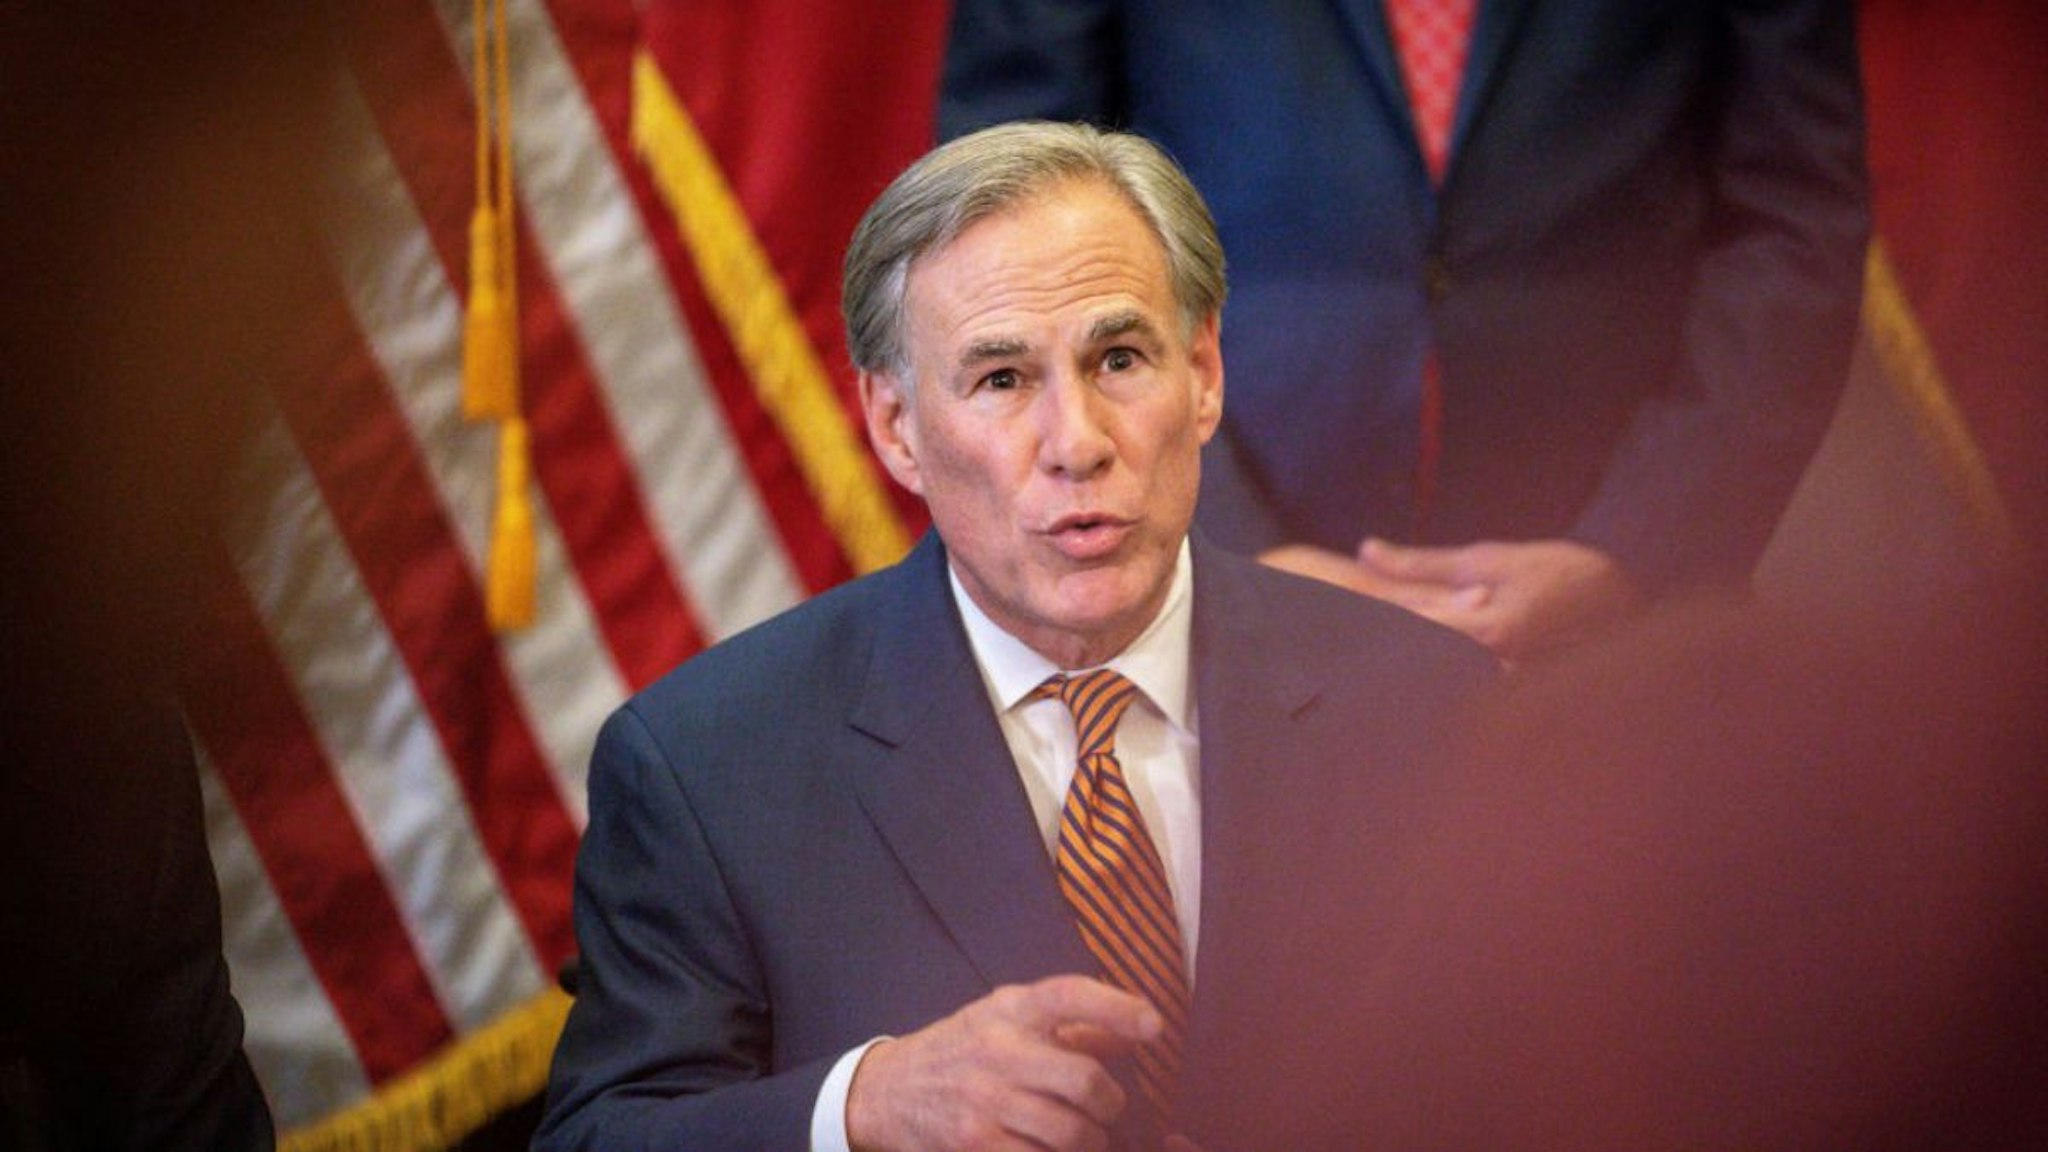 Texas Governor Greg Abbott speaks during a press conference where he signed Senate Bills 2 and 3 at the Capitol on June 8, 2021 in Austin, Texas. Governor Abbott signed the bills into law to reform the Electric Reliability Council of Texas and weatherize and improve the reliability of the state's power grid.